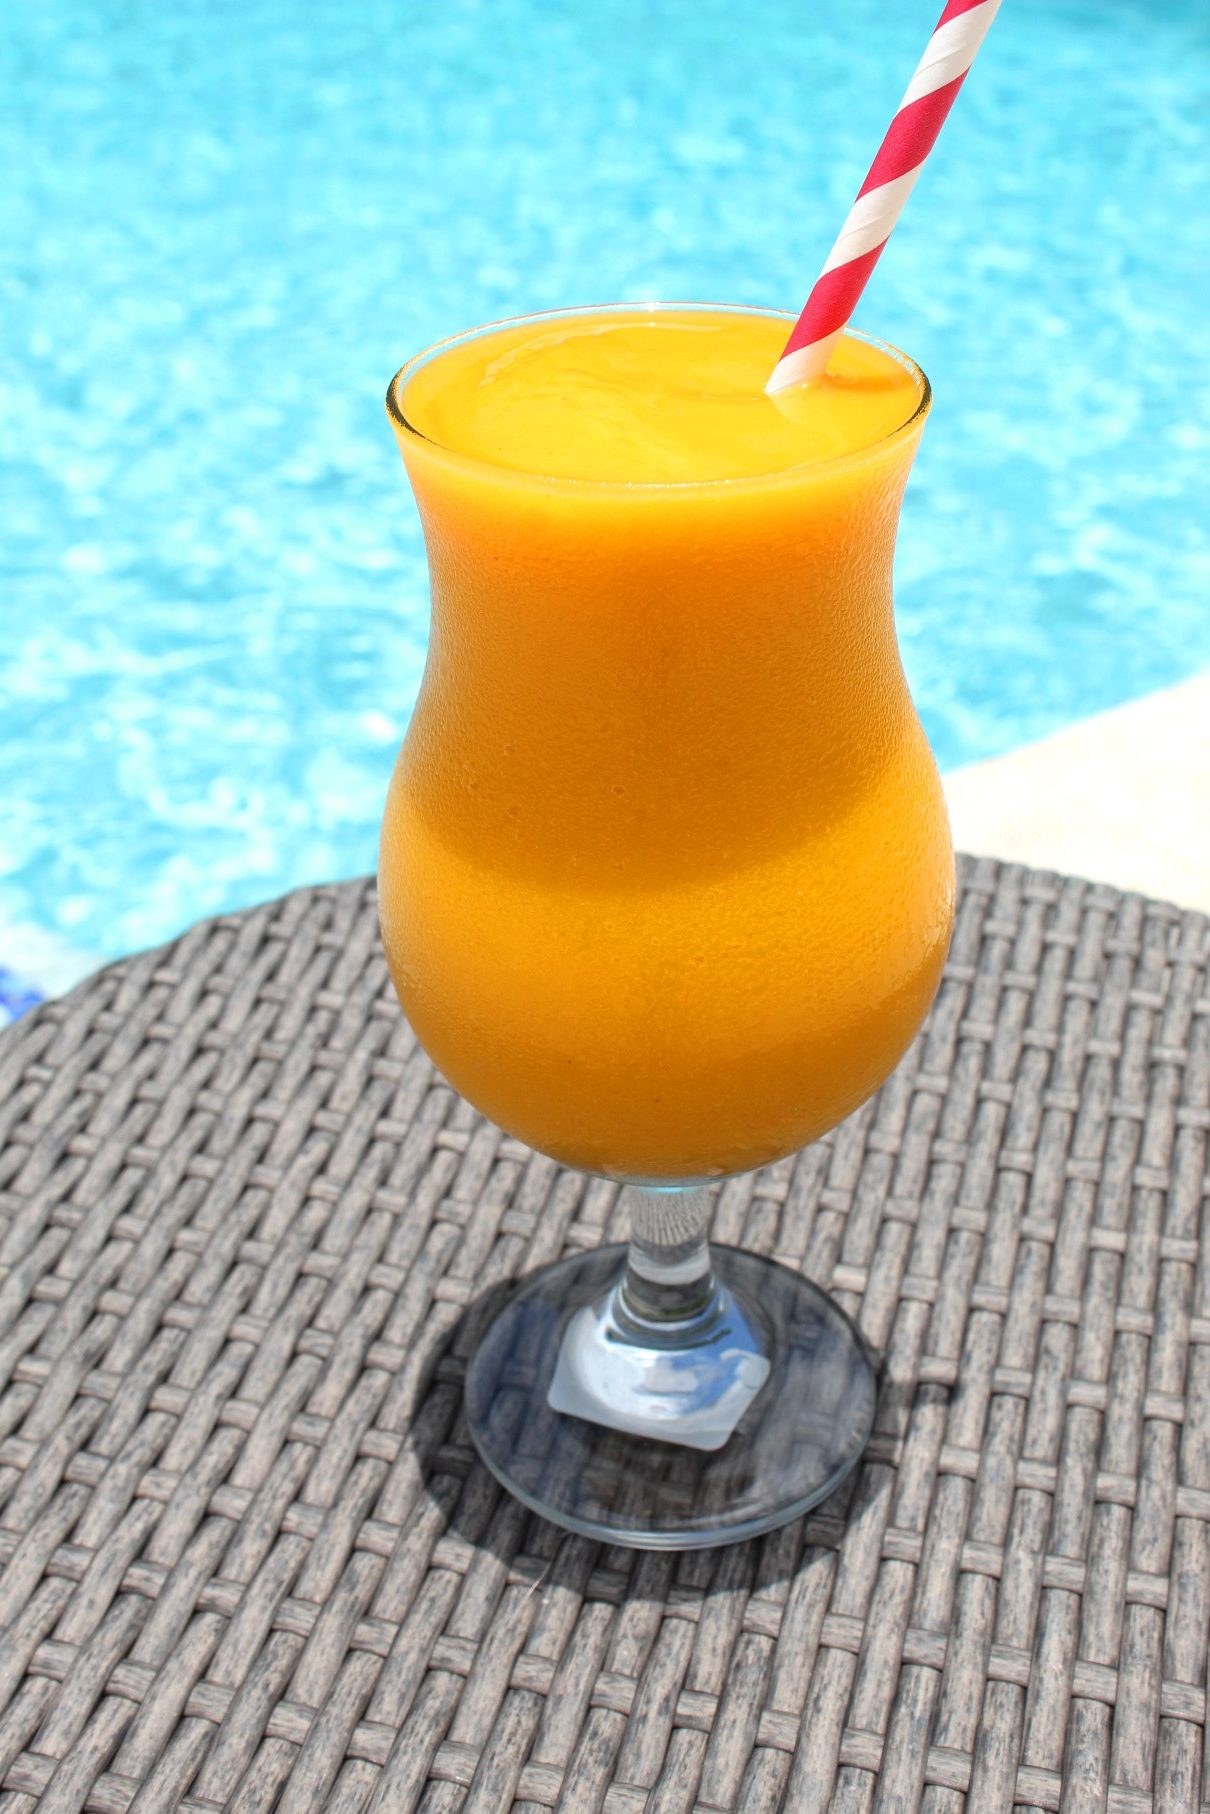 A poolside table with a frozen cocktail on it, ready to be enjoyed. Frozen drink looks tropical.